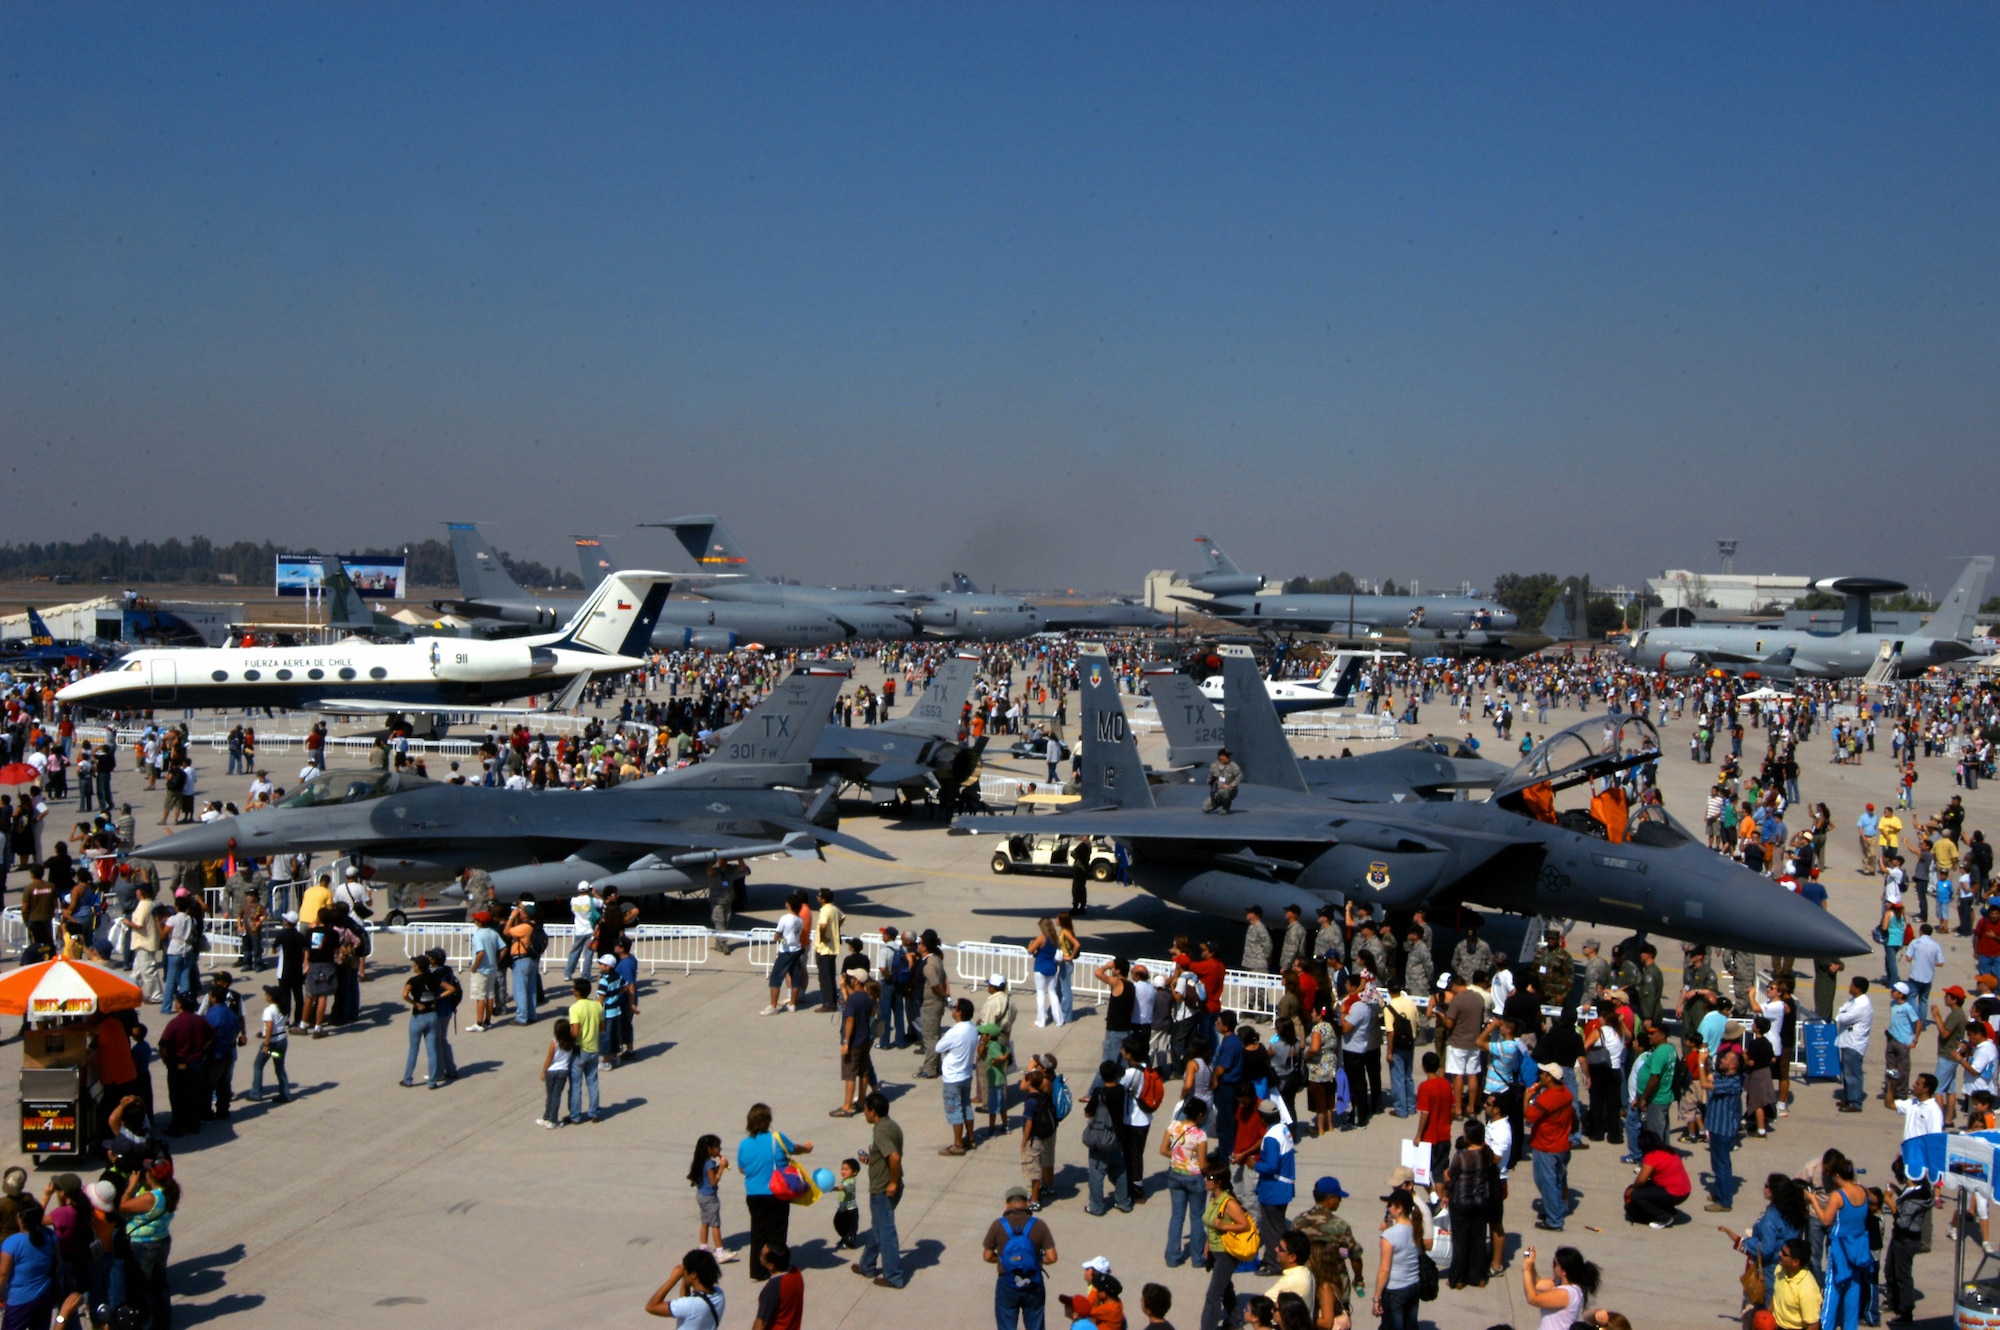 The crowd mingles around U.S. Air Force aircraft at FIDAE 2008, one of the largest air shows in South America, in Santiago, Chile. A host of aircraft and Airmen also participated in Exercise Newen 2008, which emphasizes cooperation between the U.S. and Chilean militaries. (U.S. Air Force photo/Master Sgt. Jason Tudor)